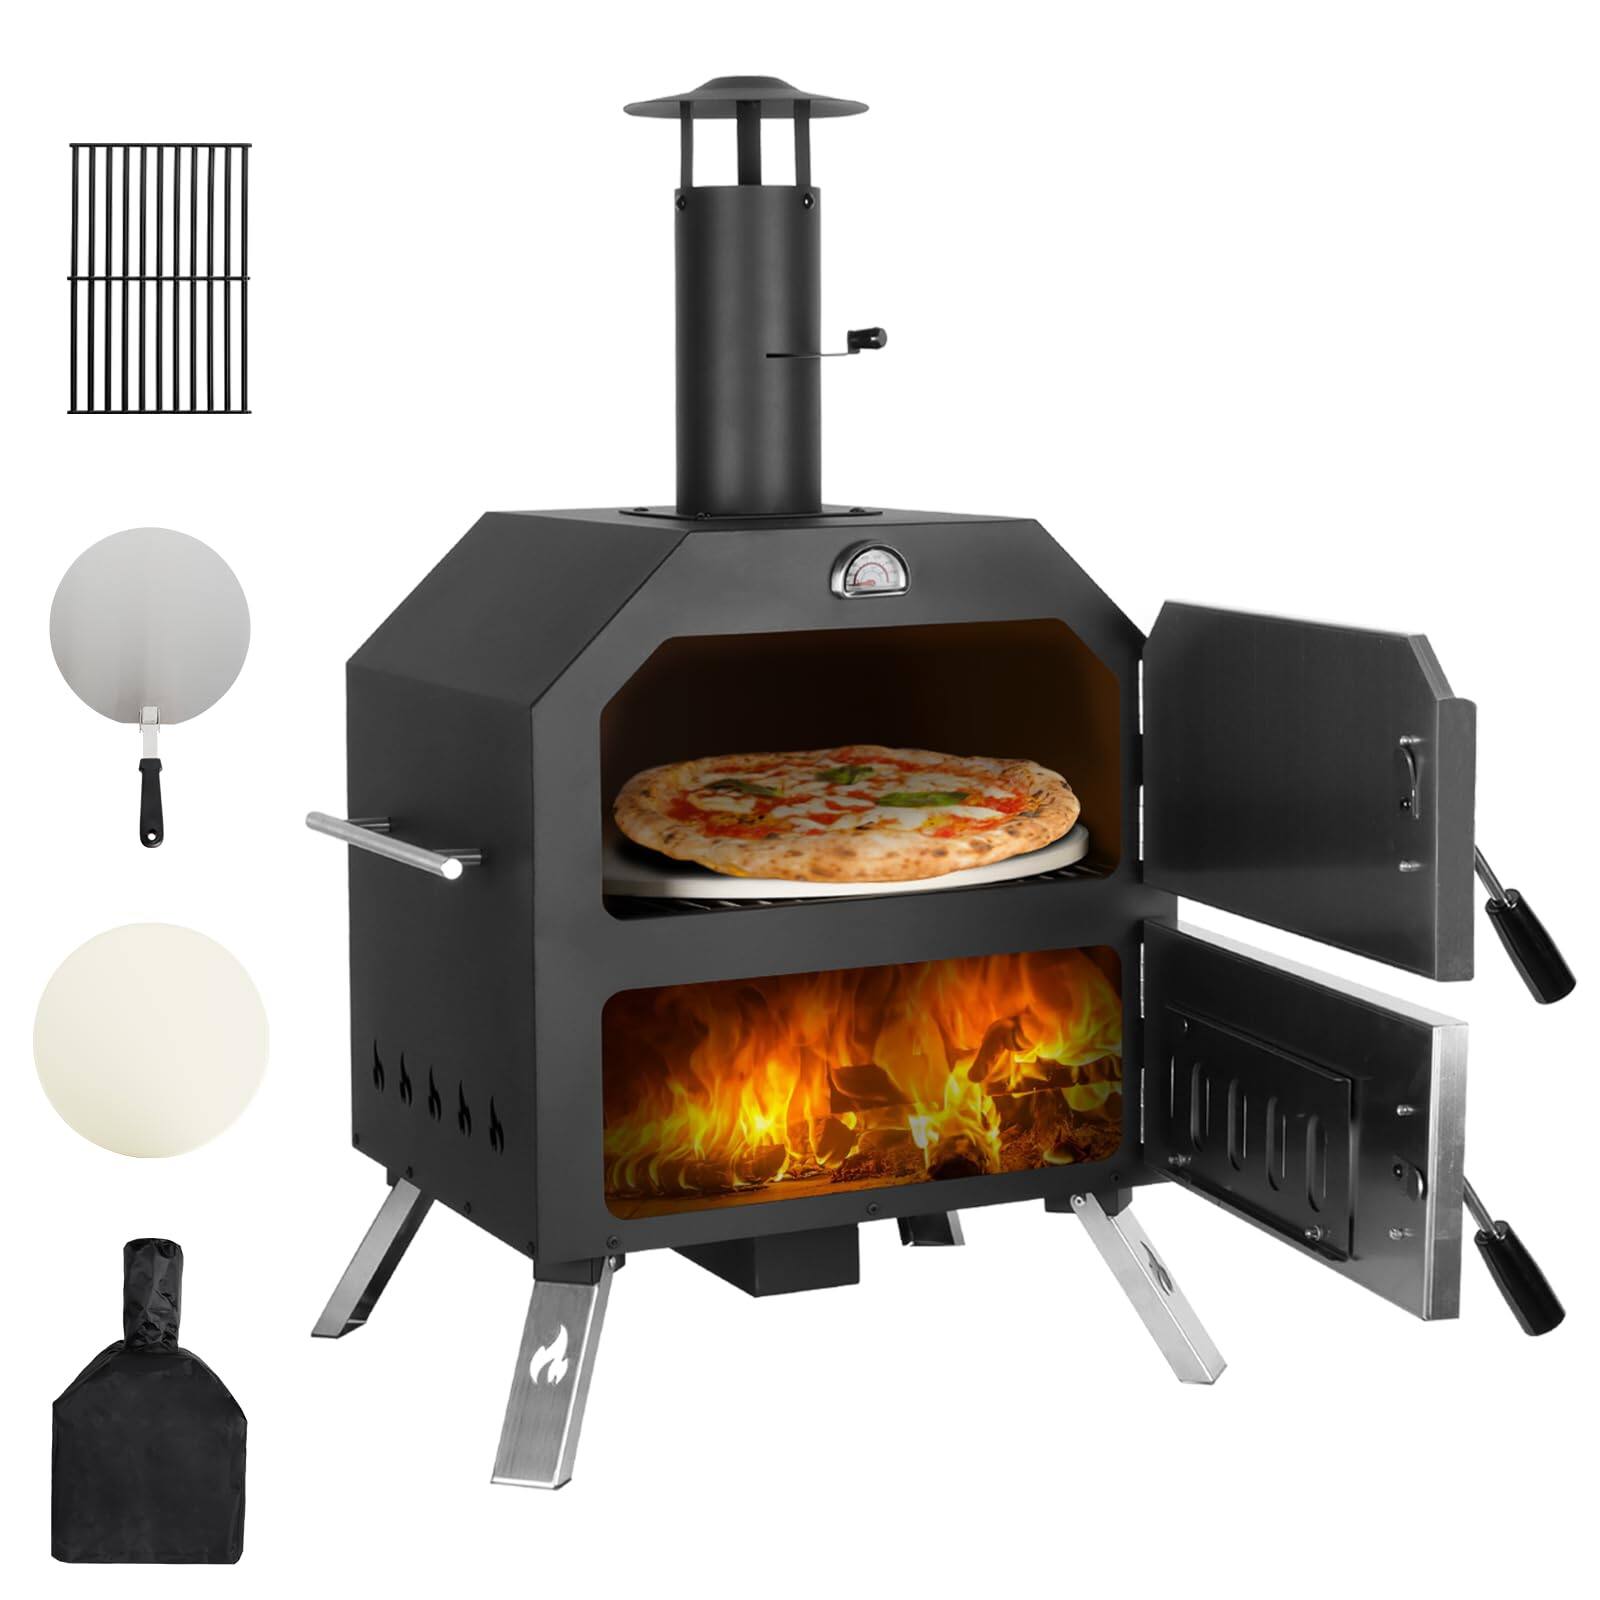 12 inch Outdoor Pizza Oven Wood Fired Pizza Oven-OEM/ODM Pizza Oven Factory